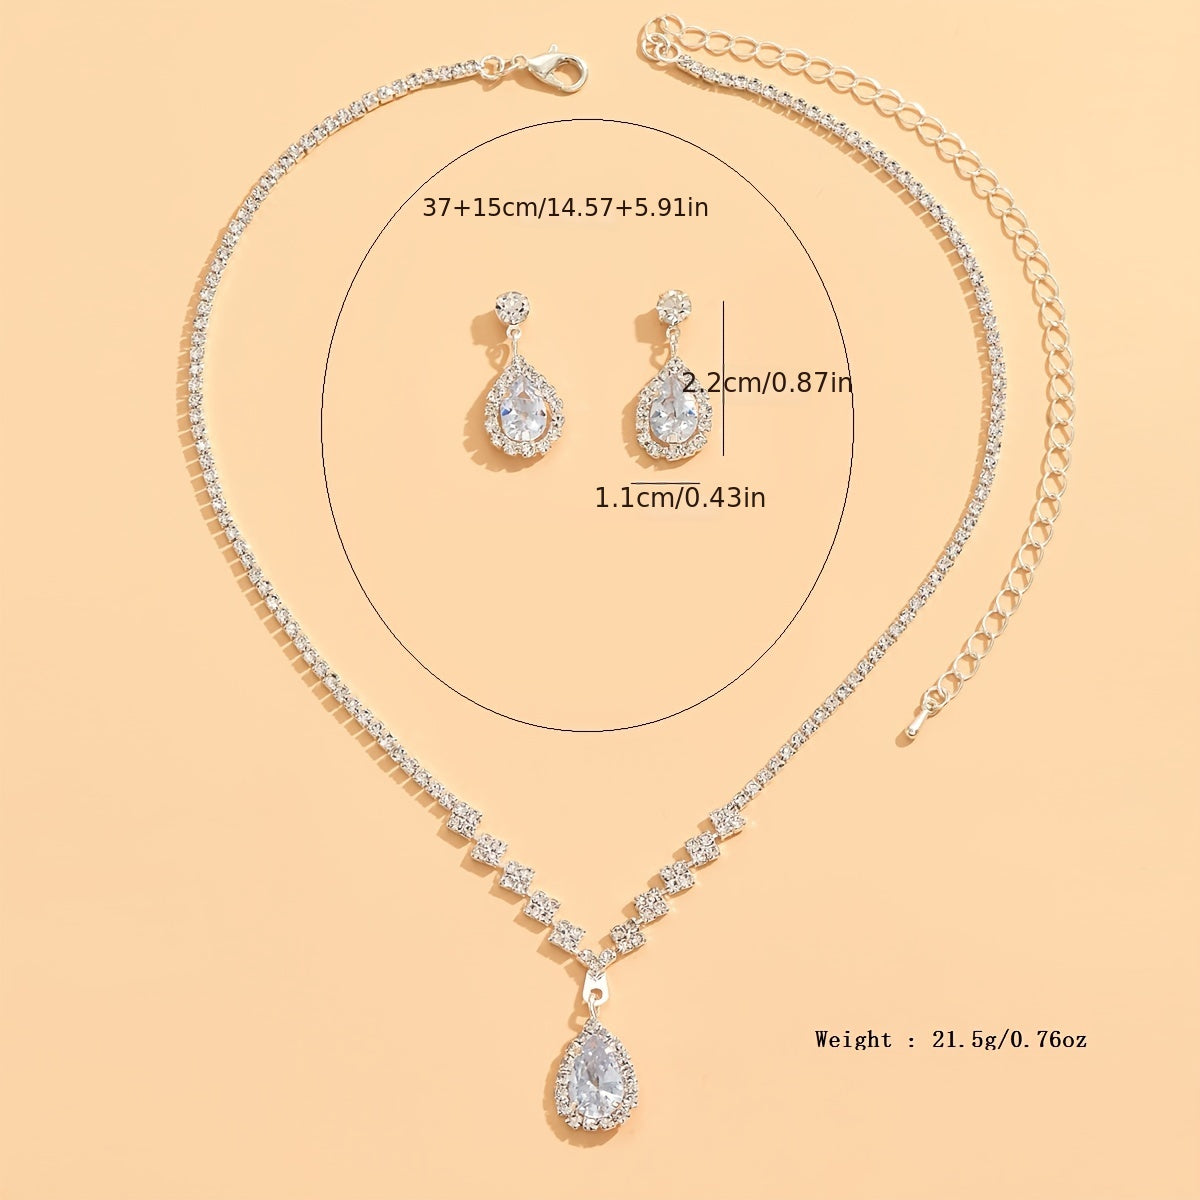 Elegant Teardrop Jewelry Set with Shiny Zircon Pendant and Dangle Earrings - Perfect Gift for Women and Girls